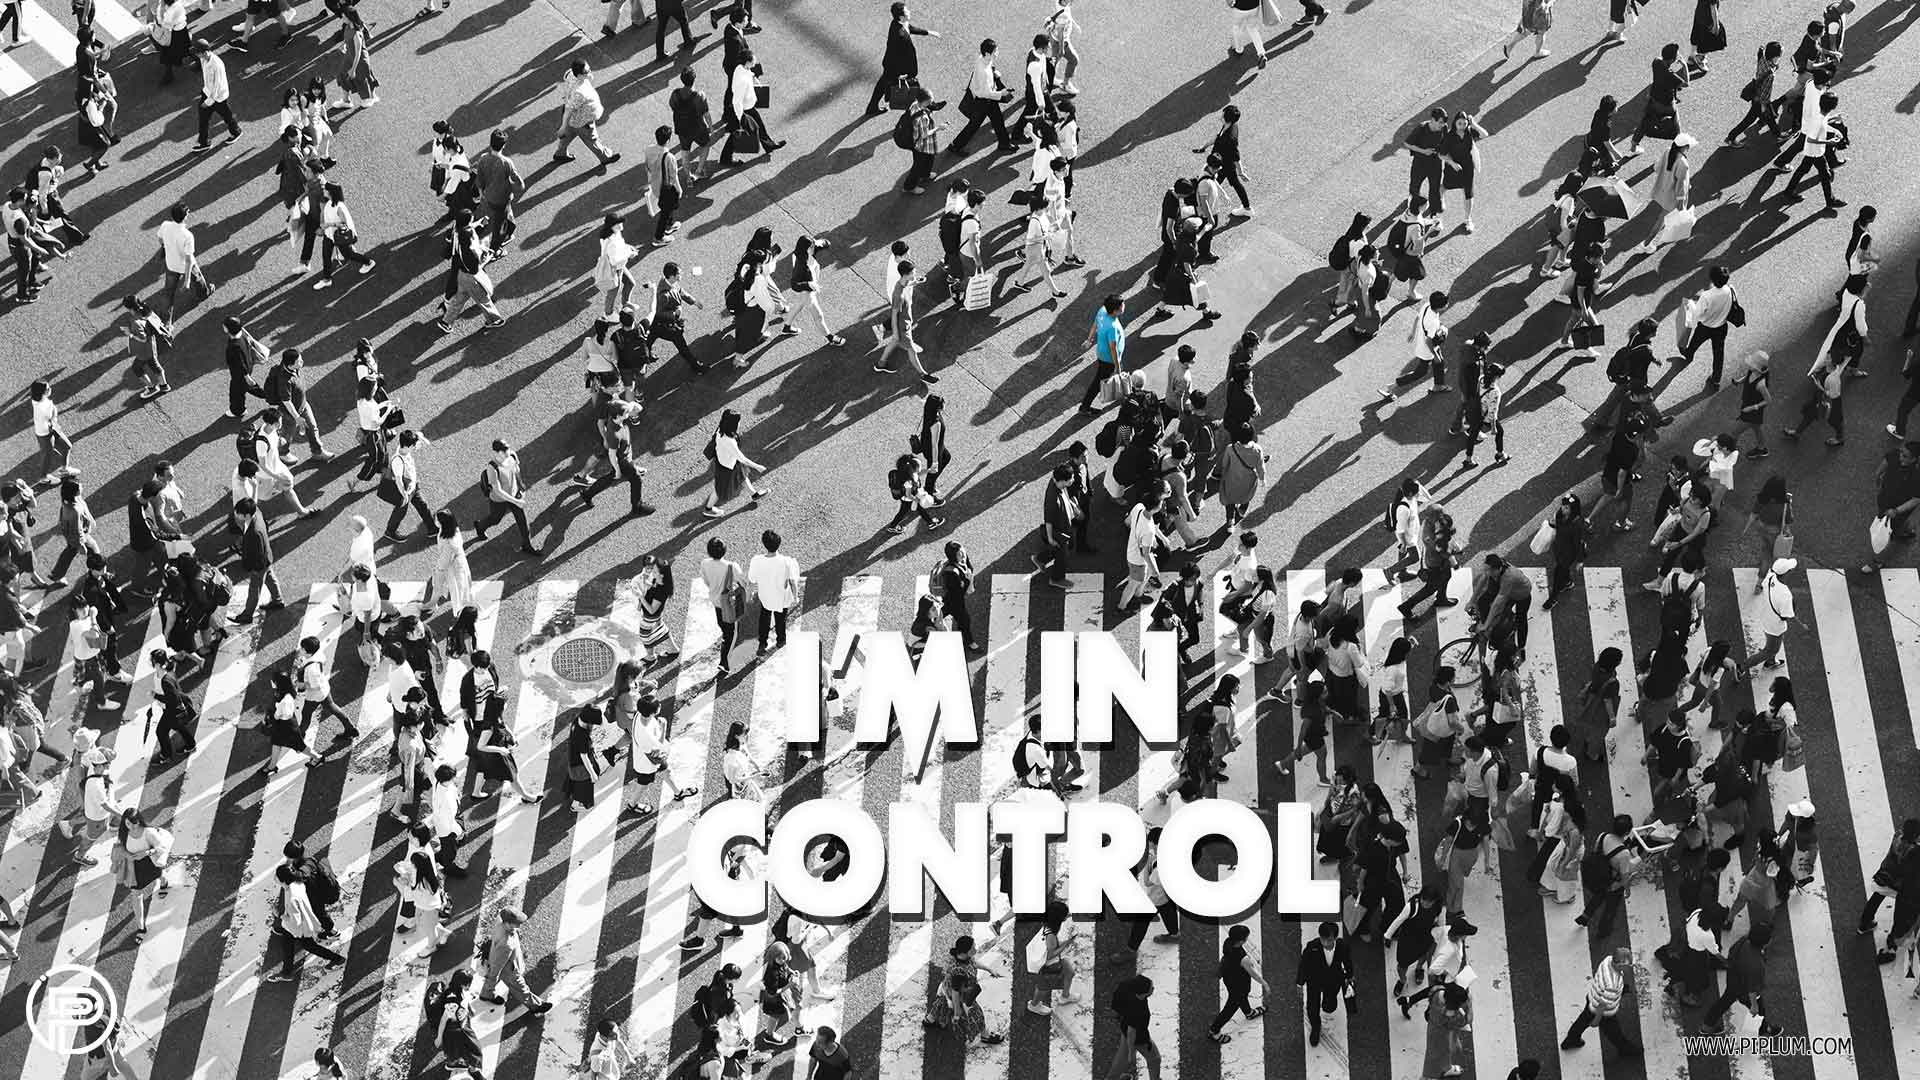 I-am-in-control-inspirational-quote-crossroads-many-people-busy-city